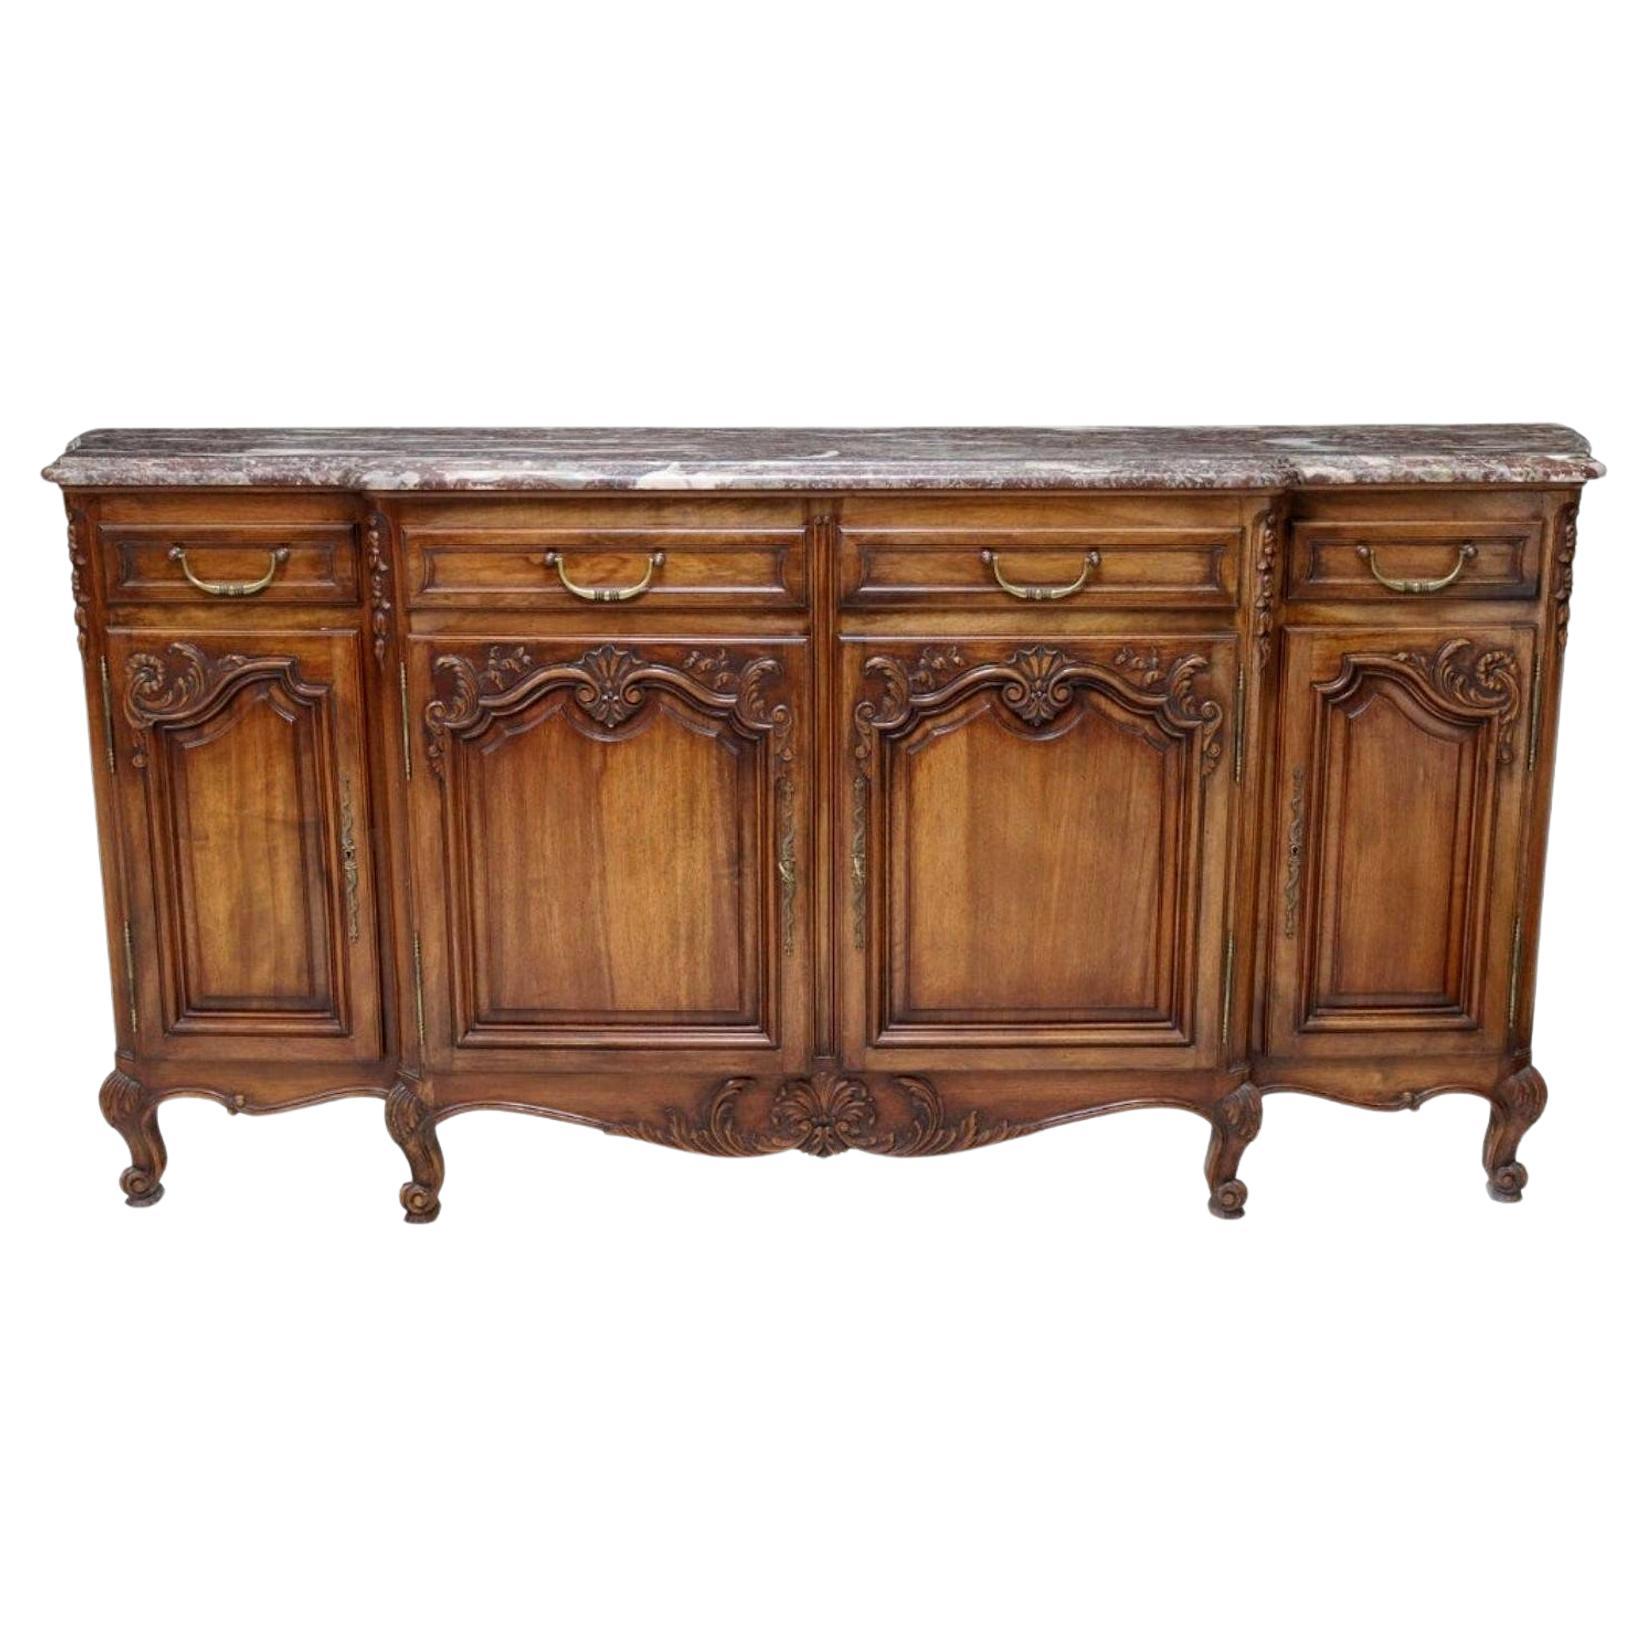 French Provincial Louis XV Grand Regence Style Breakfront Sideboard For Sale